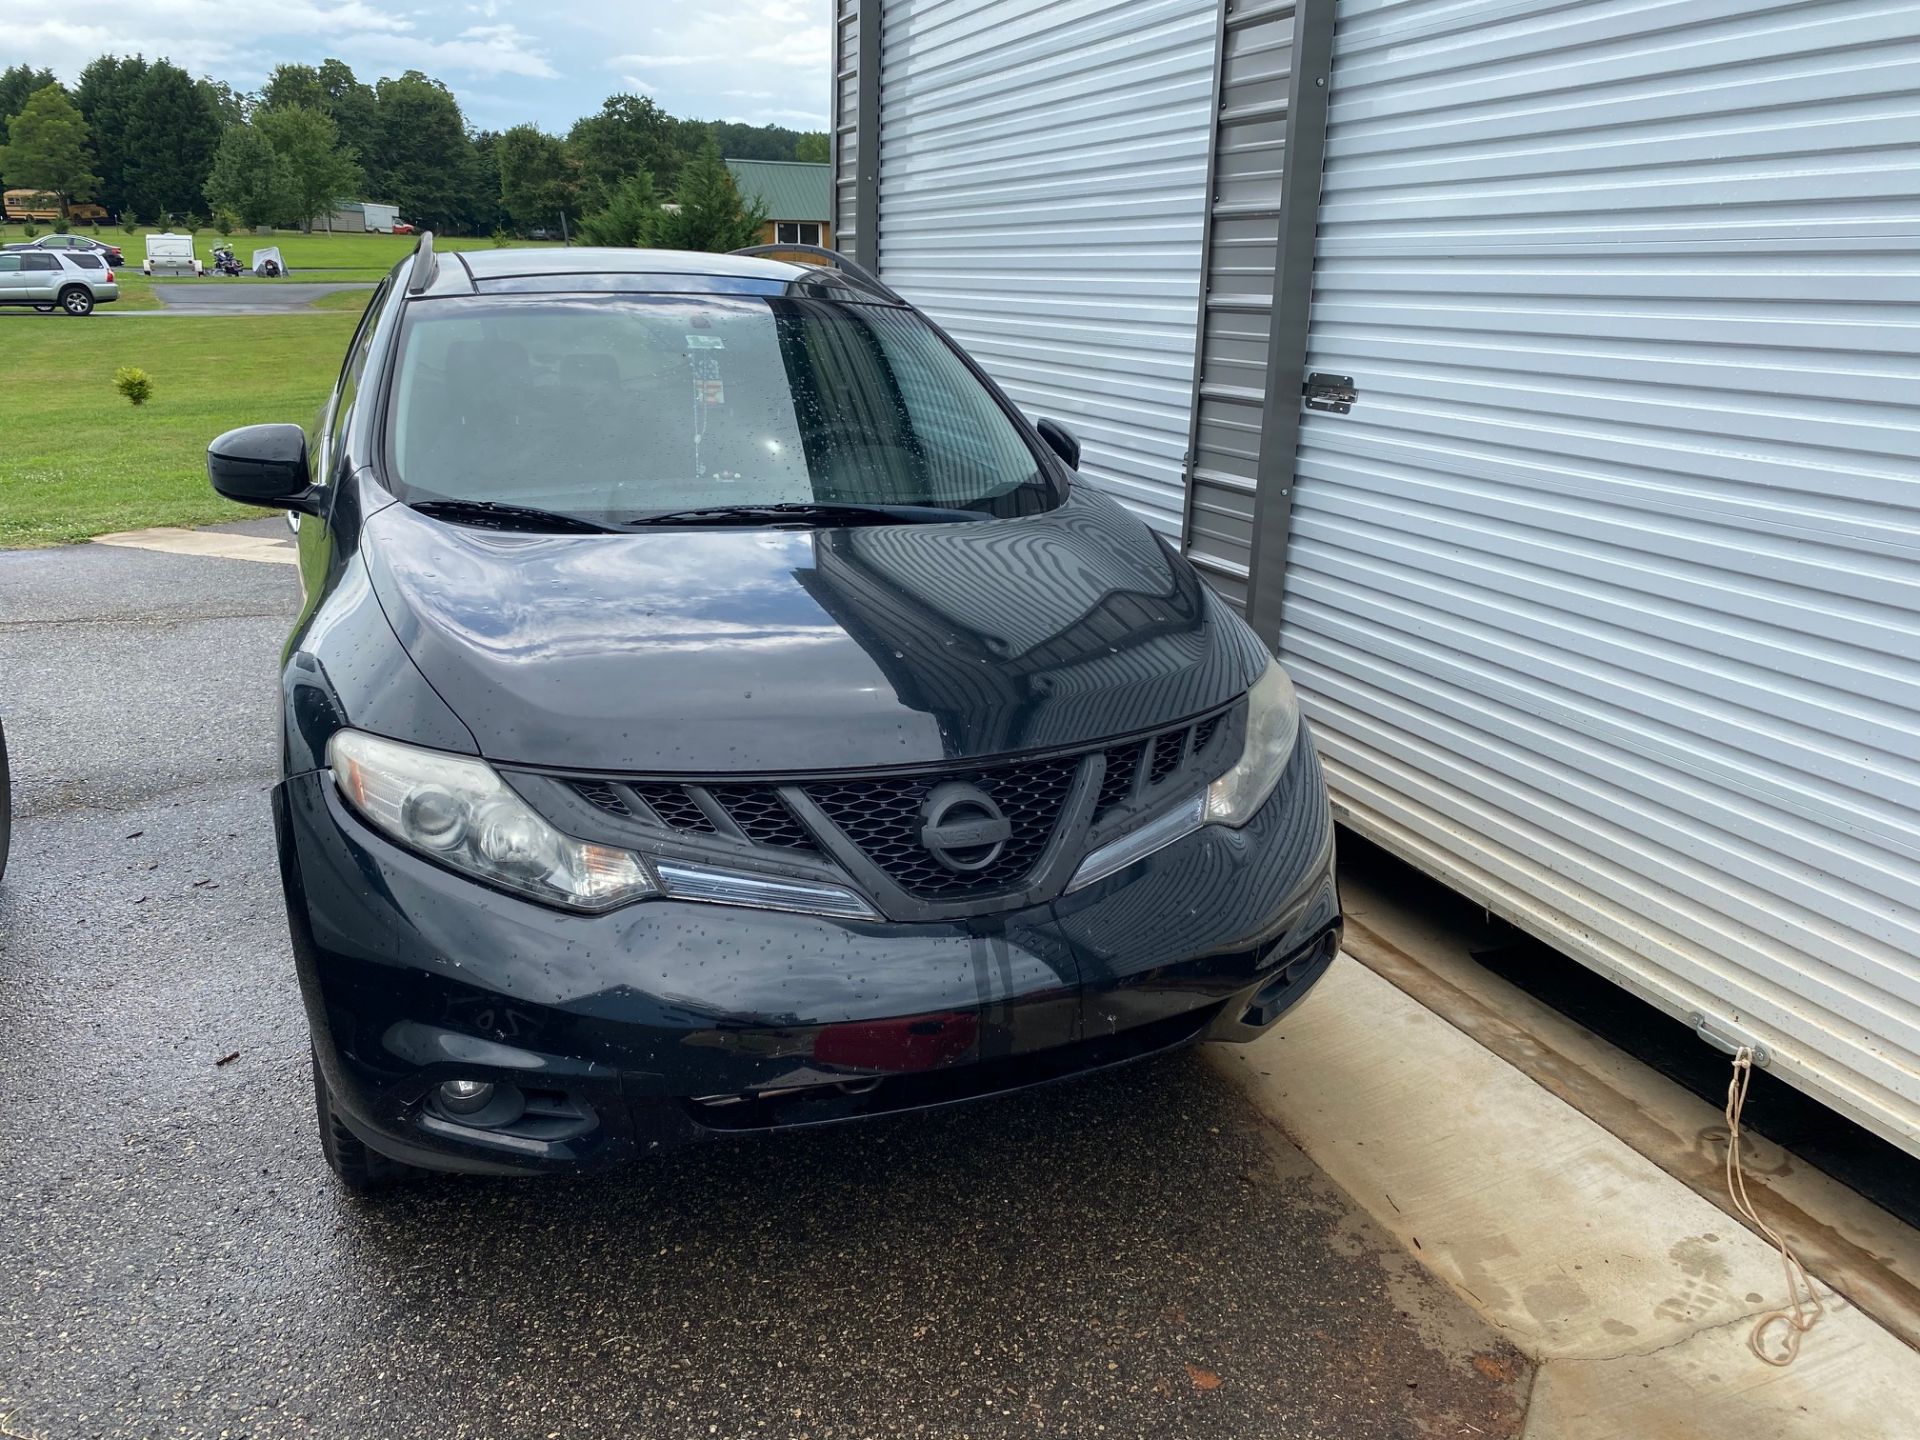 2012 NISSAN MURANO - BLACK - BLACK LEATHER - 77,144 MILES ON ODOMETER - (LOCATED IN INMAN SC)